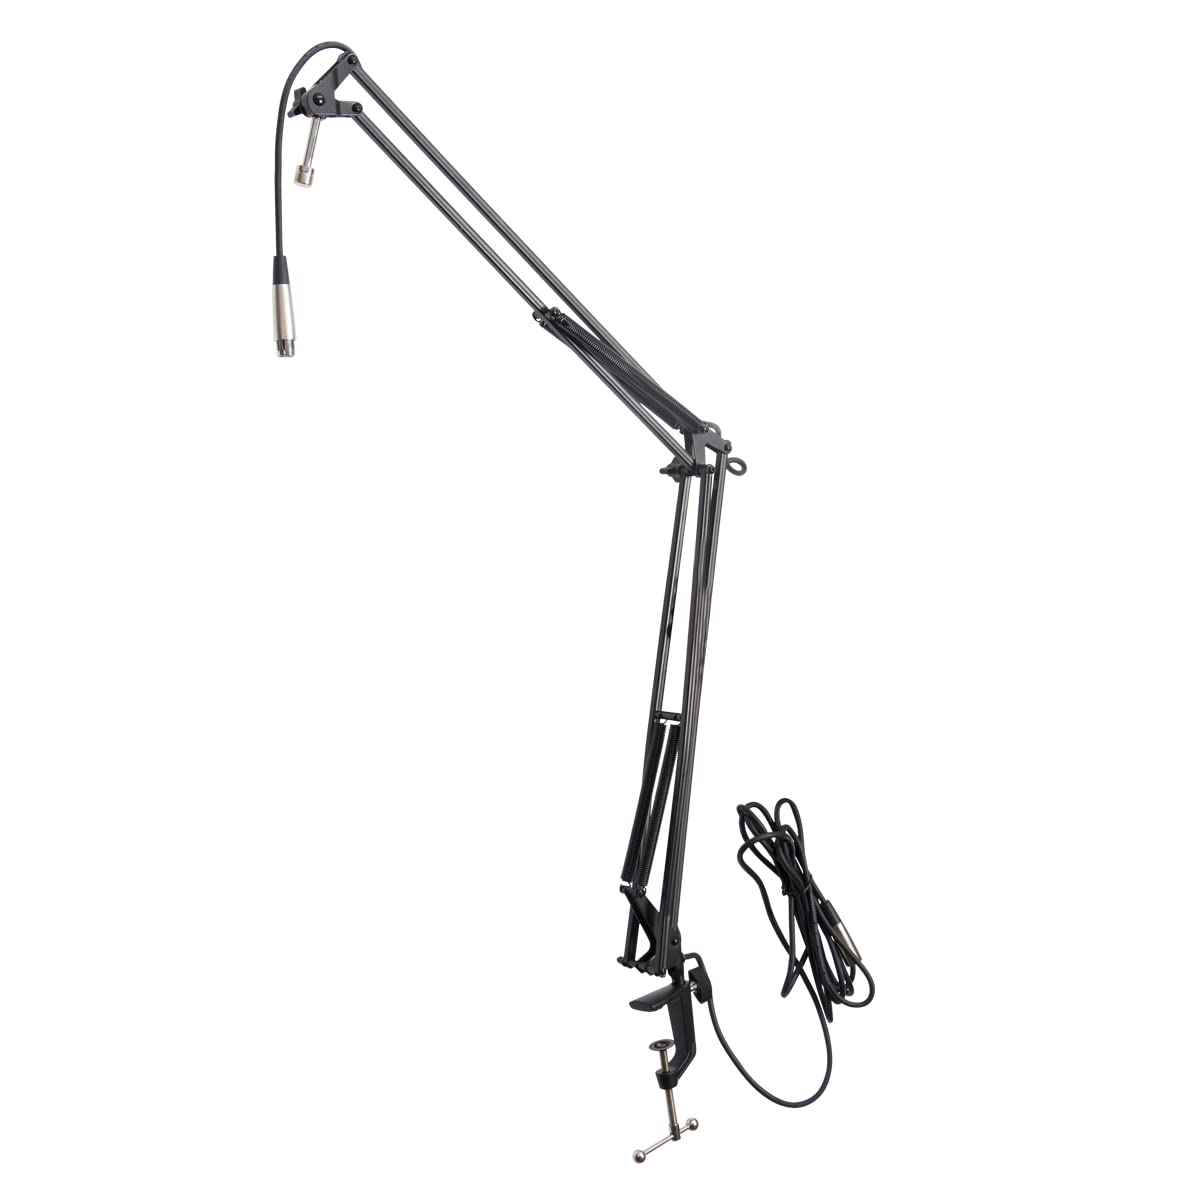 38" On-Stage Broadcast Mic Boom Arm w/ 10' XLR Cable $19 + Free Shipping w/ Prime or on $35+